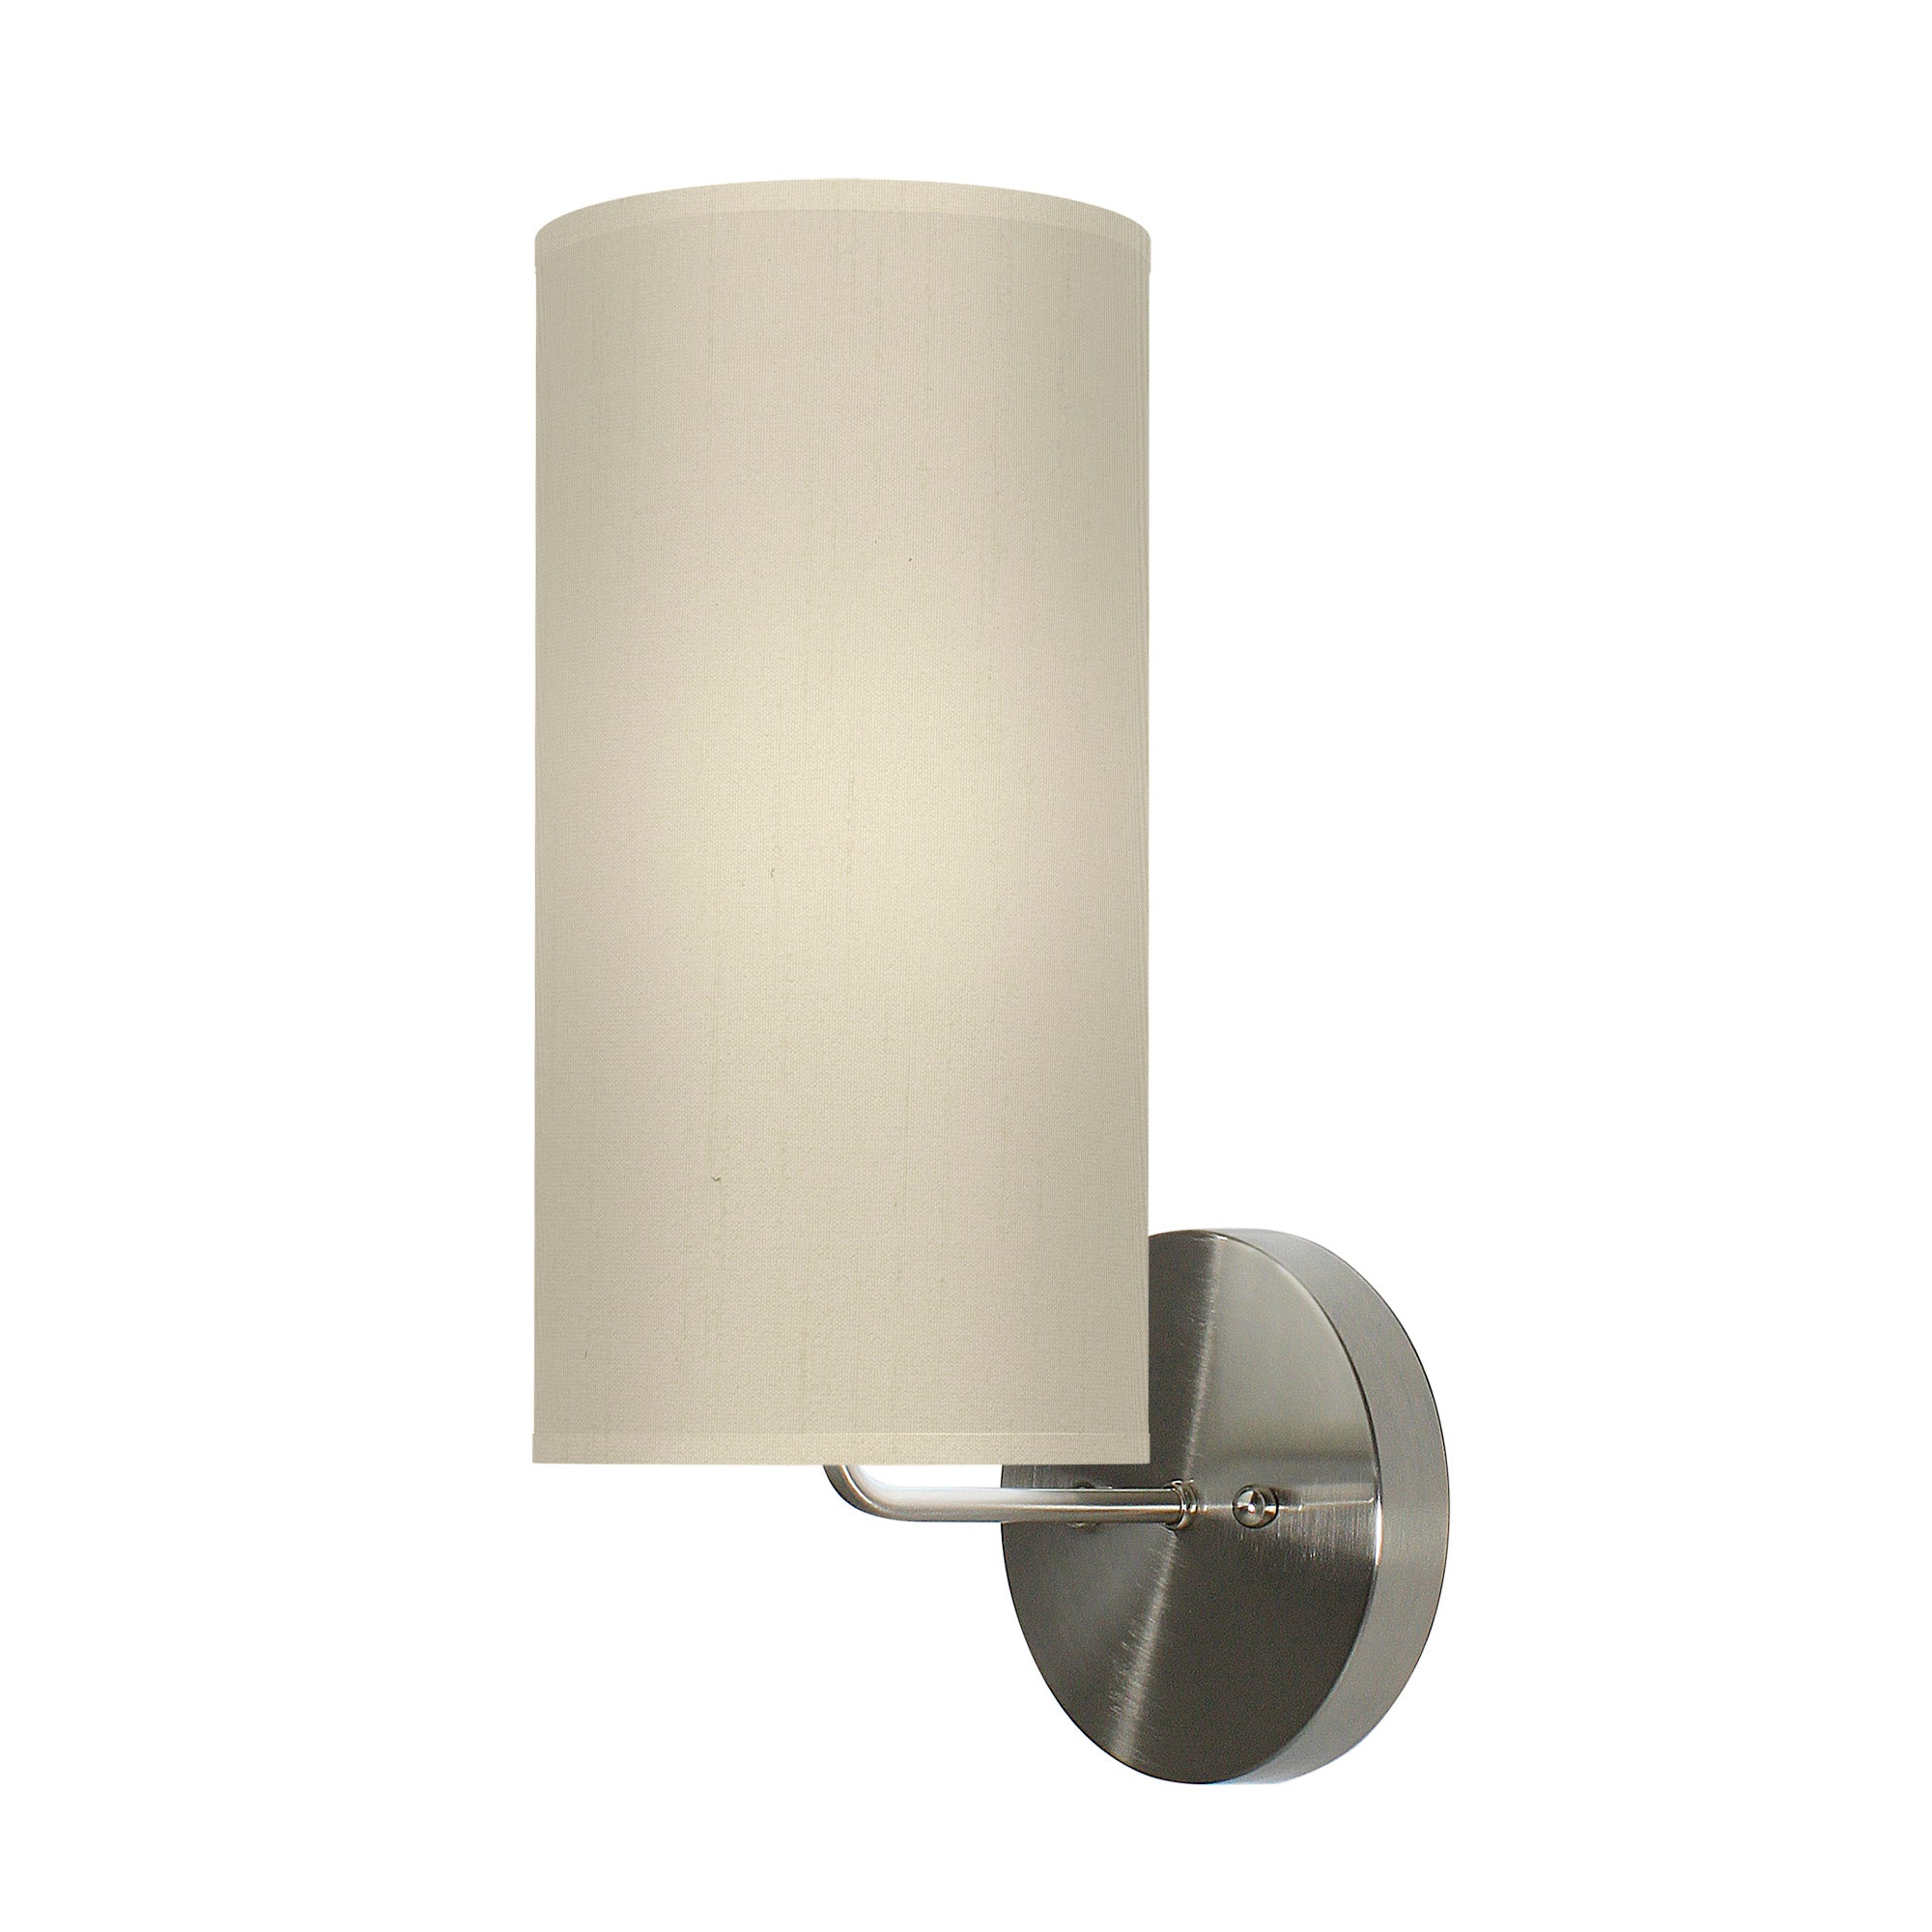 The Uma Wall Sconce from Seascape Fixtures in silk, cream color.